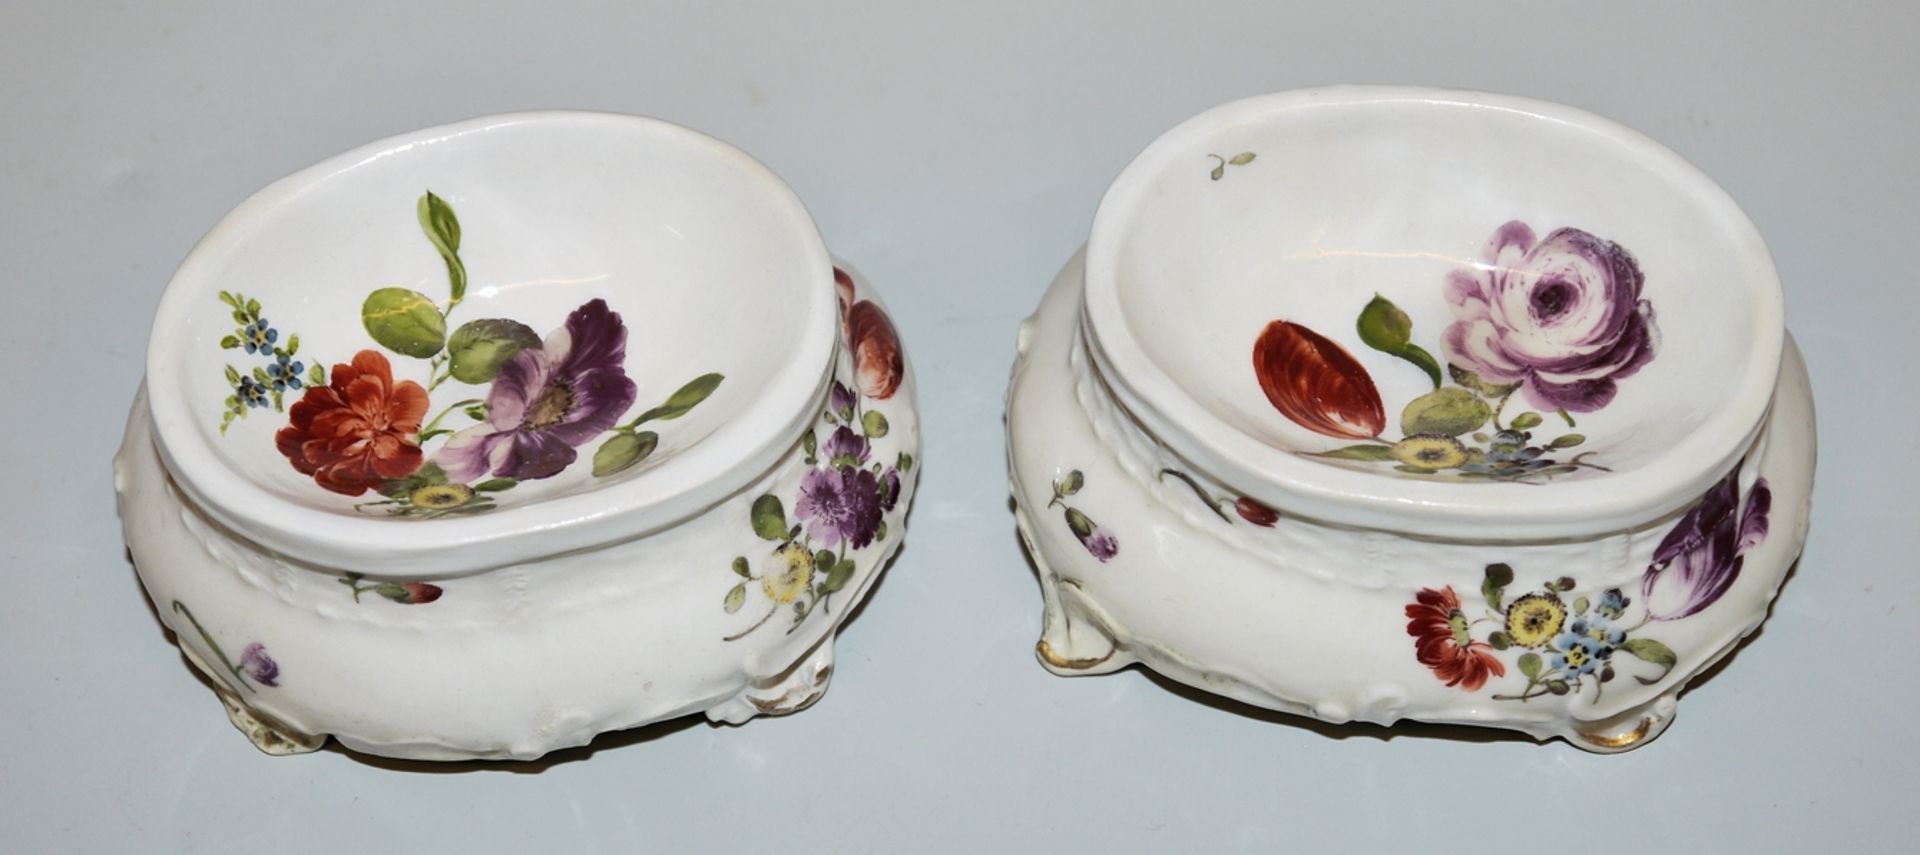 5 x fine porcelain, Ludwigsburg and Meissen from 1750 - Image 2 of 5